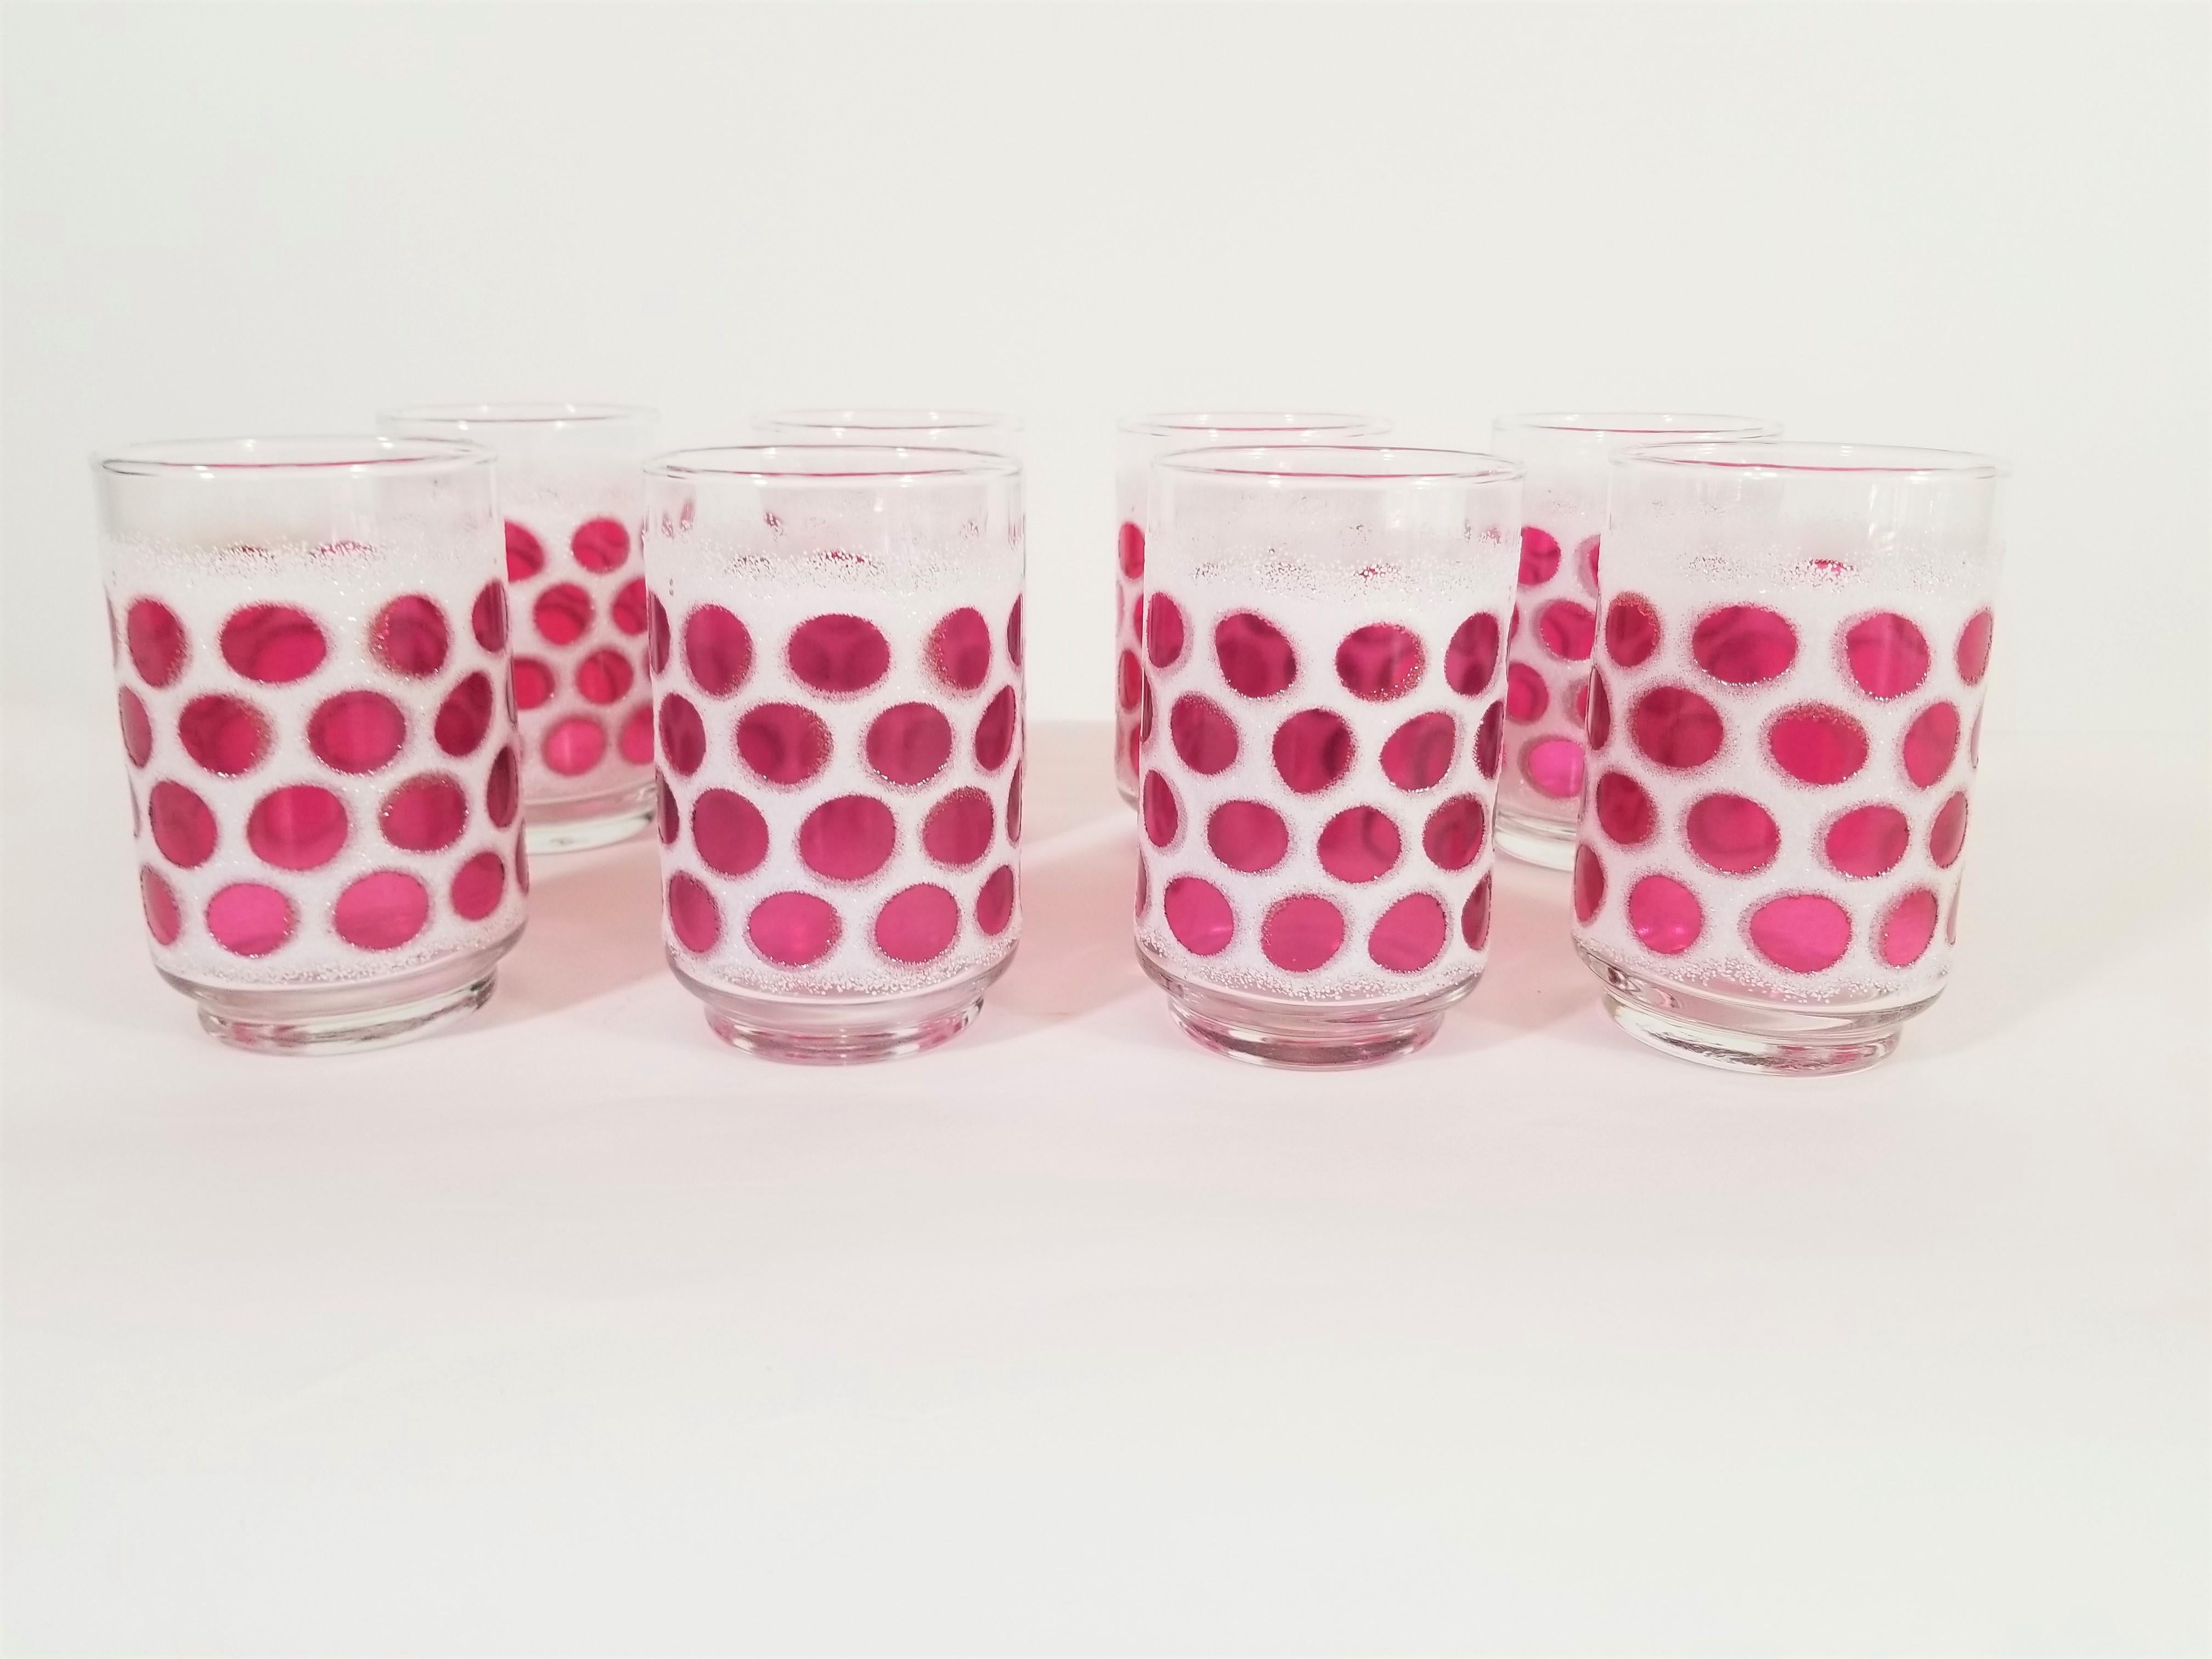 Set of 8 midcentury glasses made by Libbey. A fun set with dark pink / reddish blown glass dots surrounded by a textured white frosting. All glasses are in excellent condition and marked with Libbey signature L on bottom.